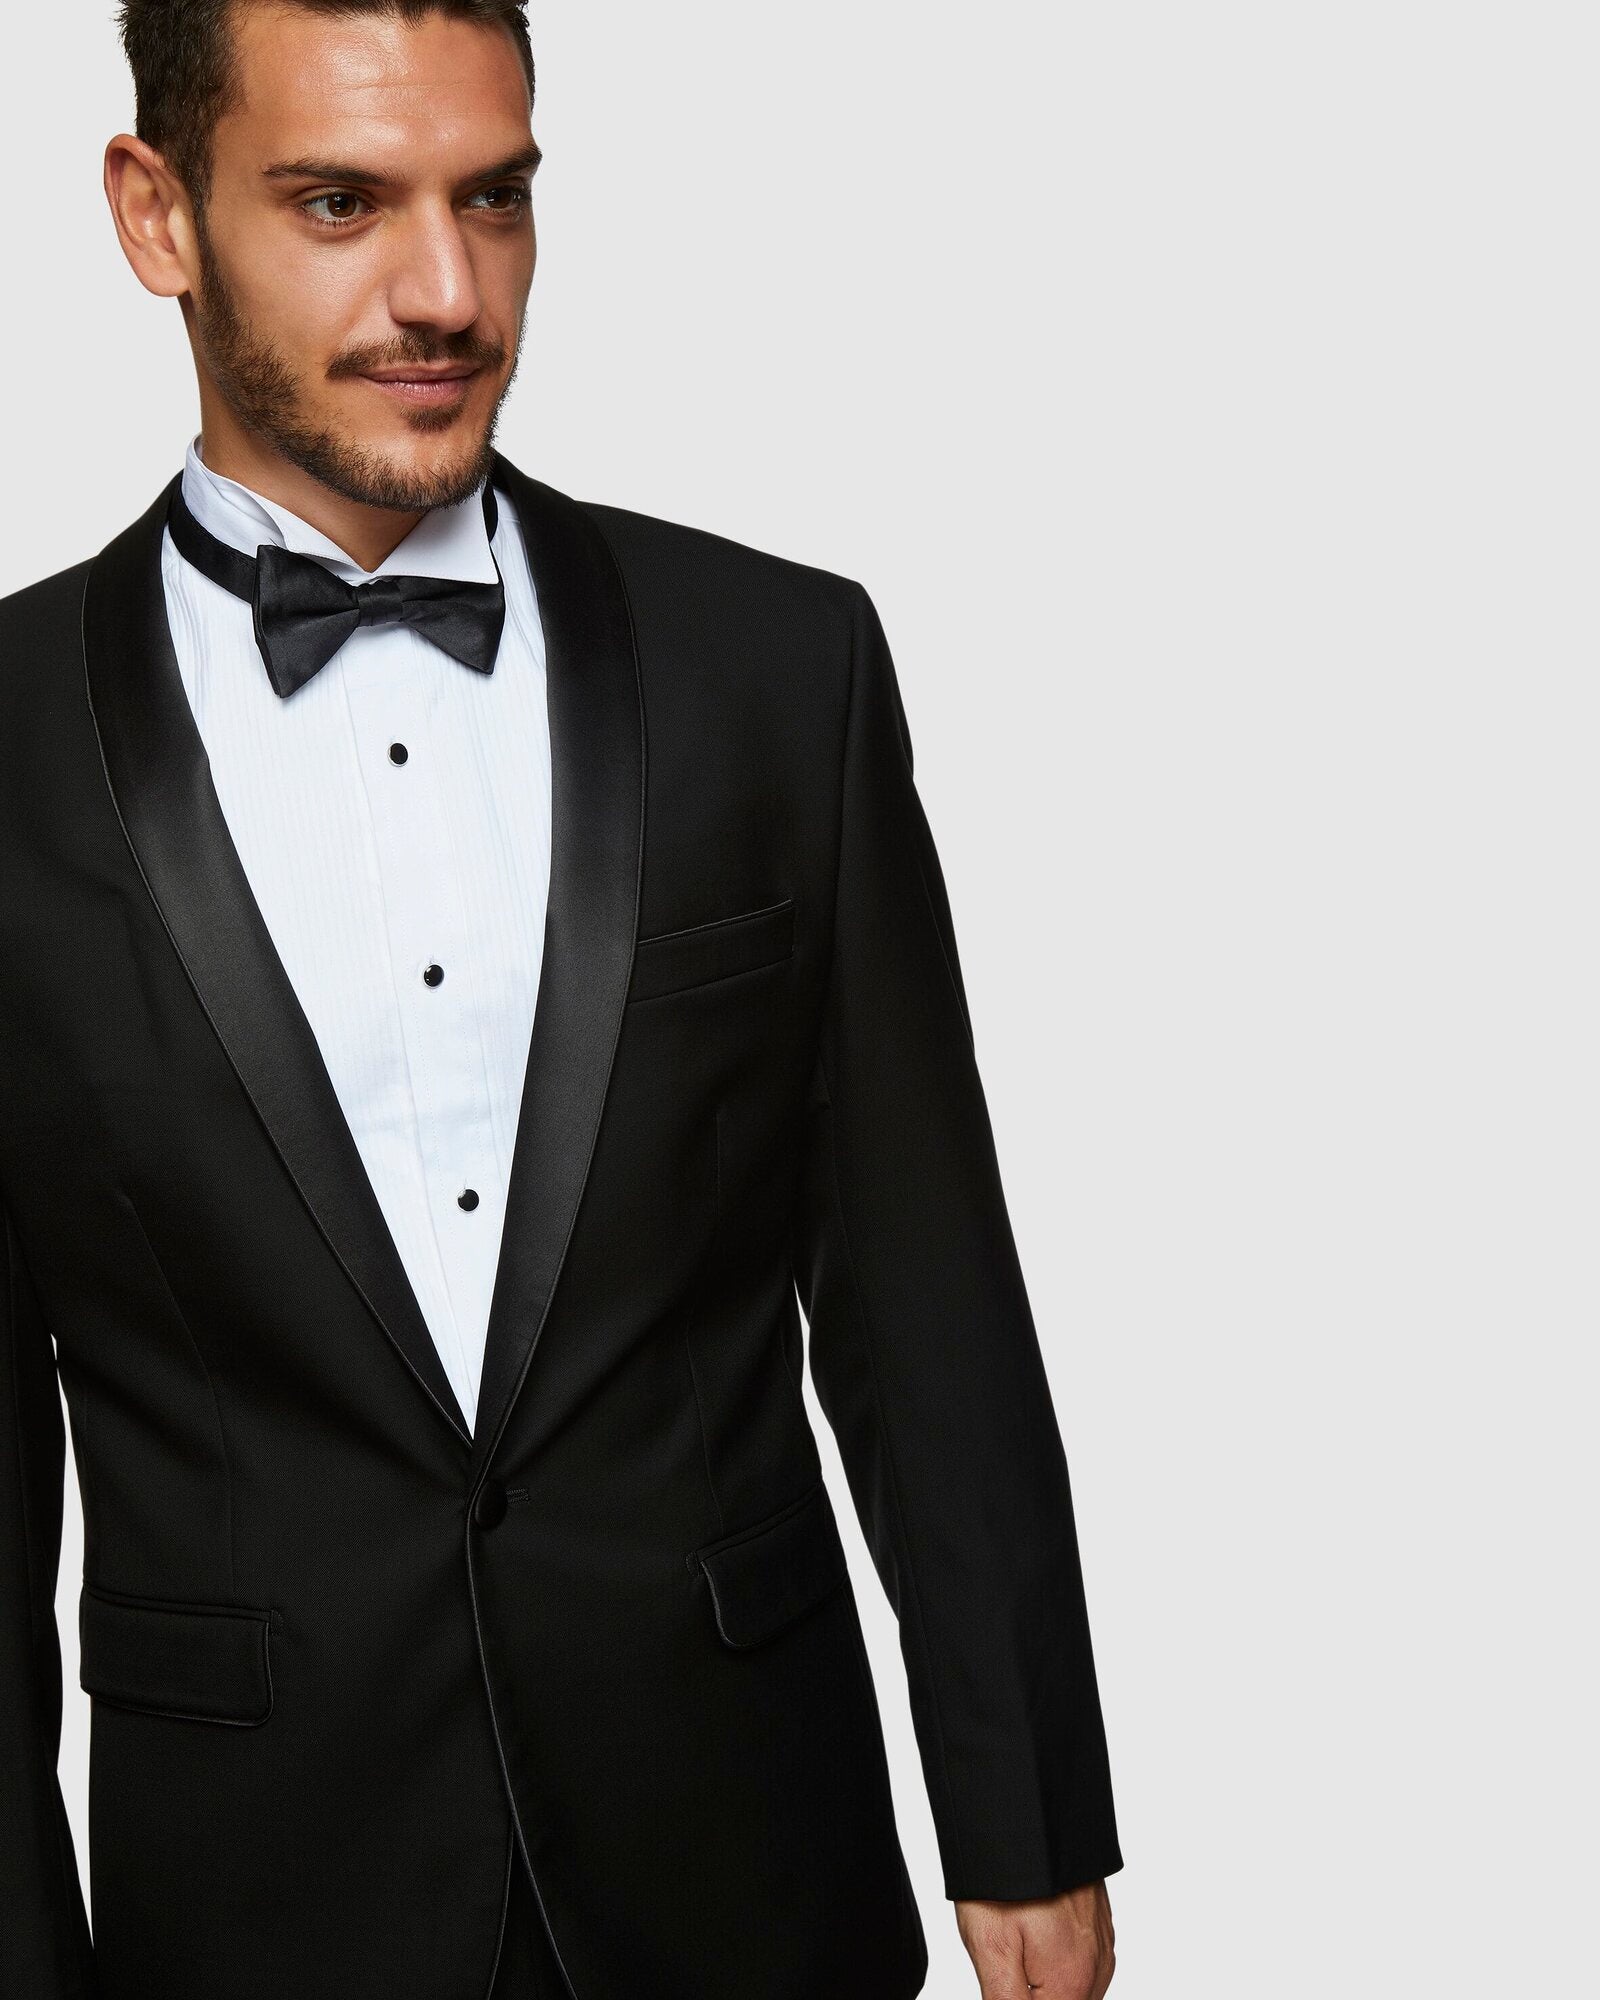 Kelly Country PGH Pure Wool Black Dinner Suit Set - Kelly Country